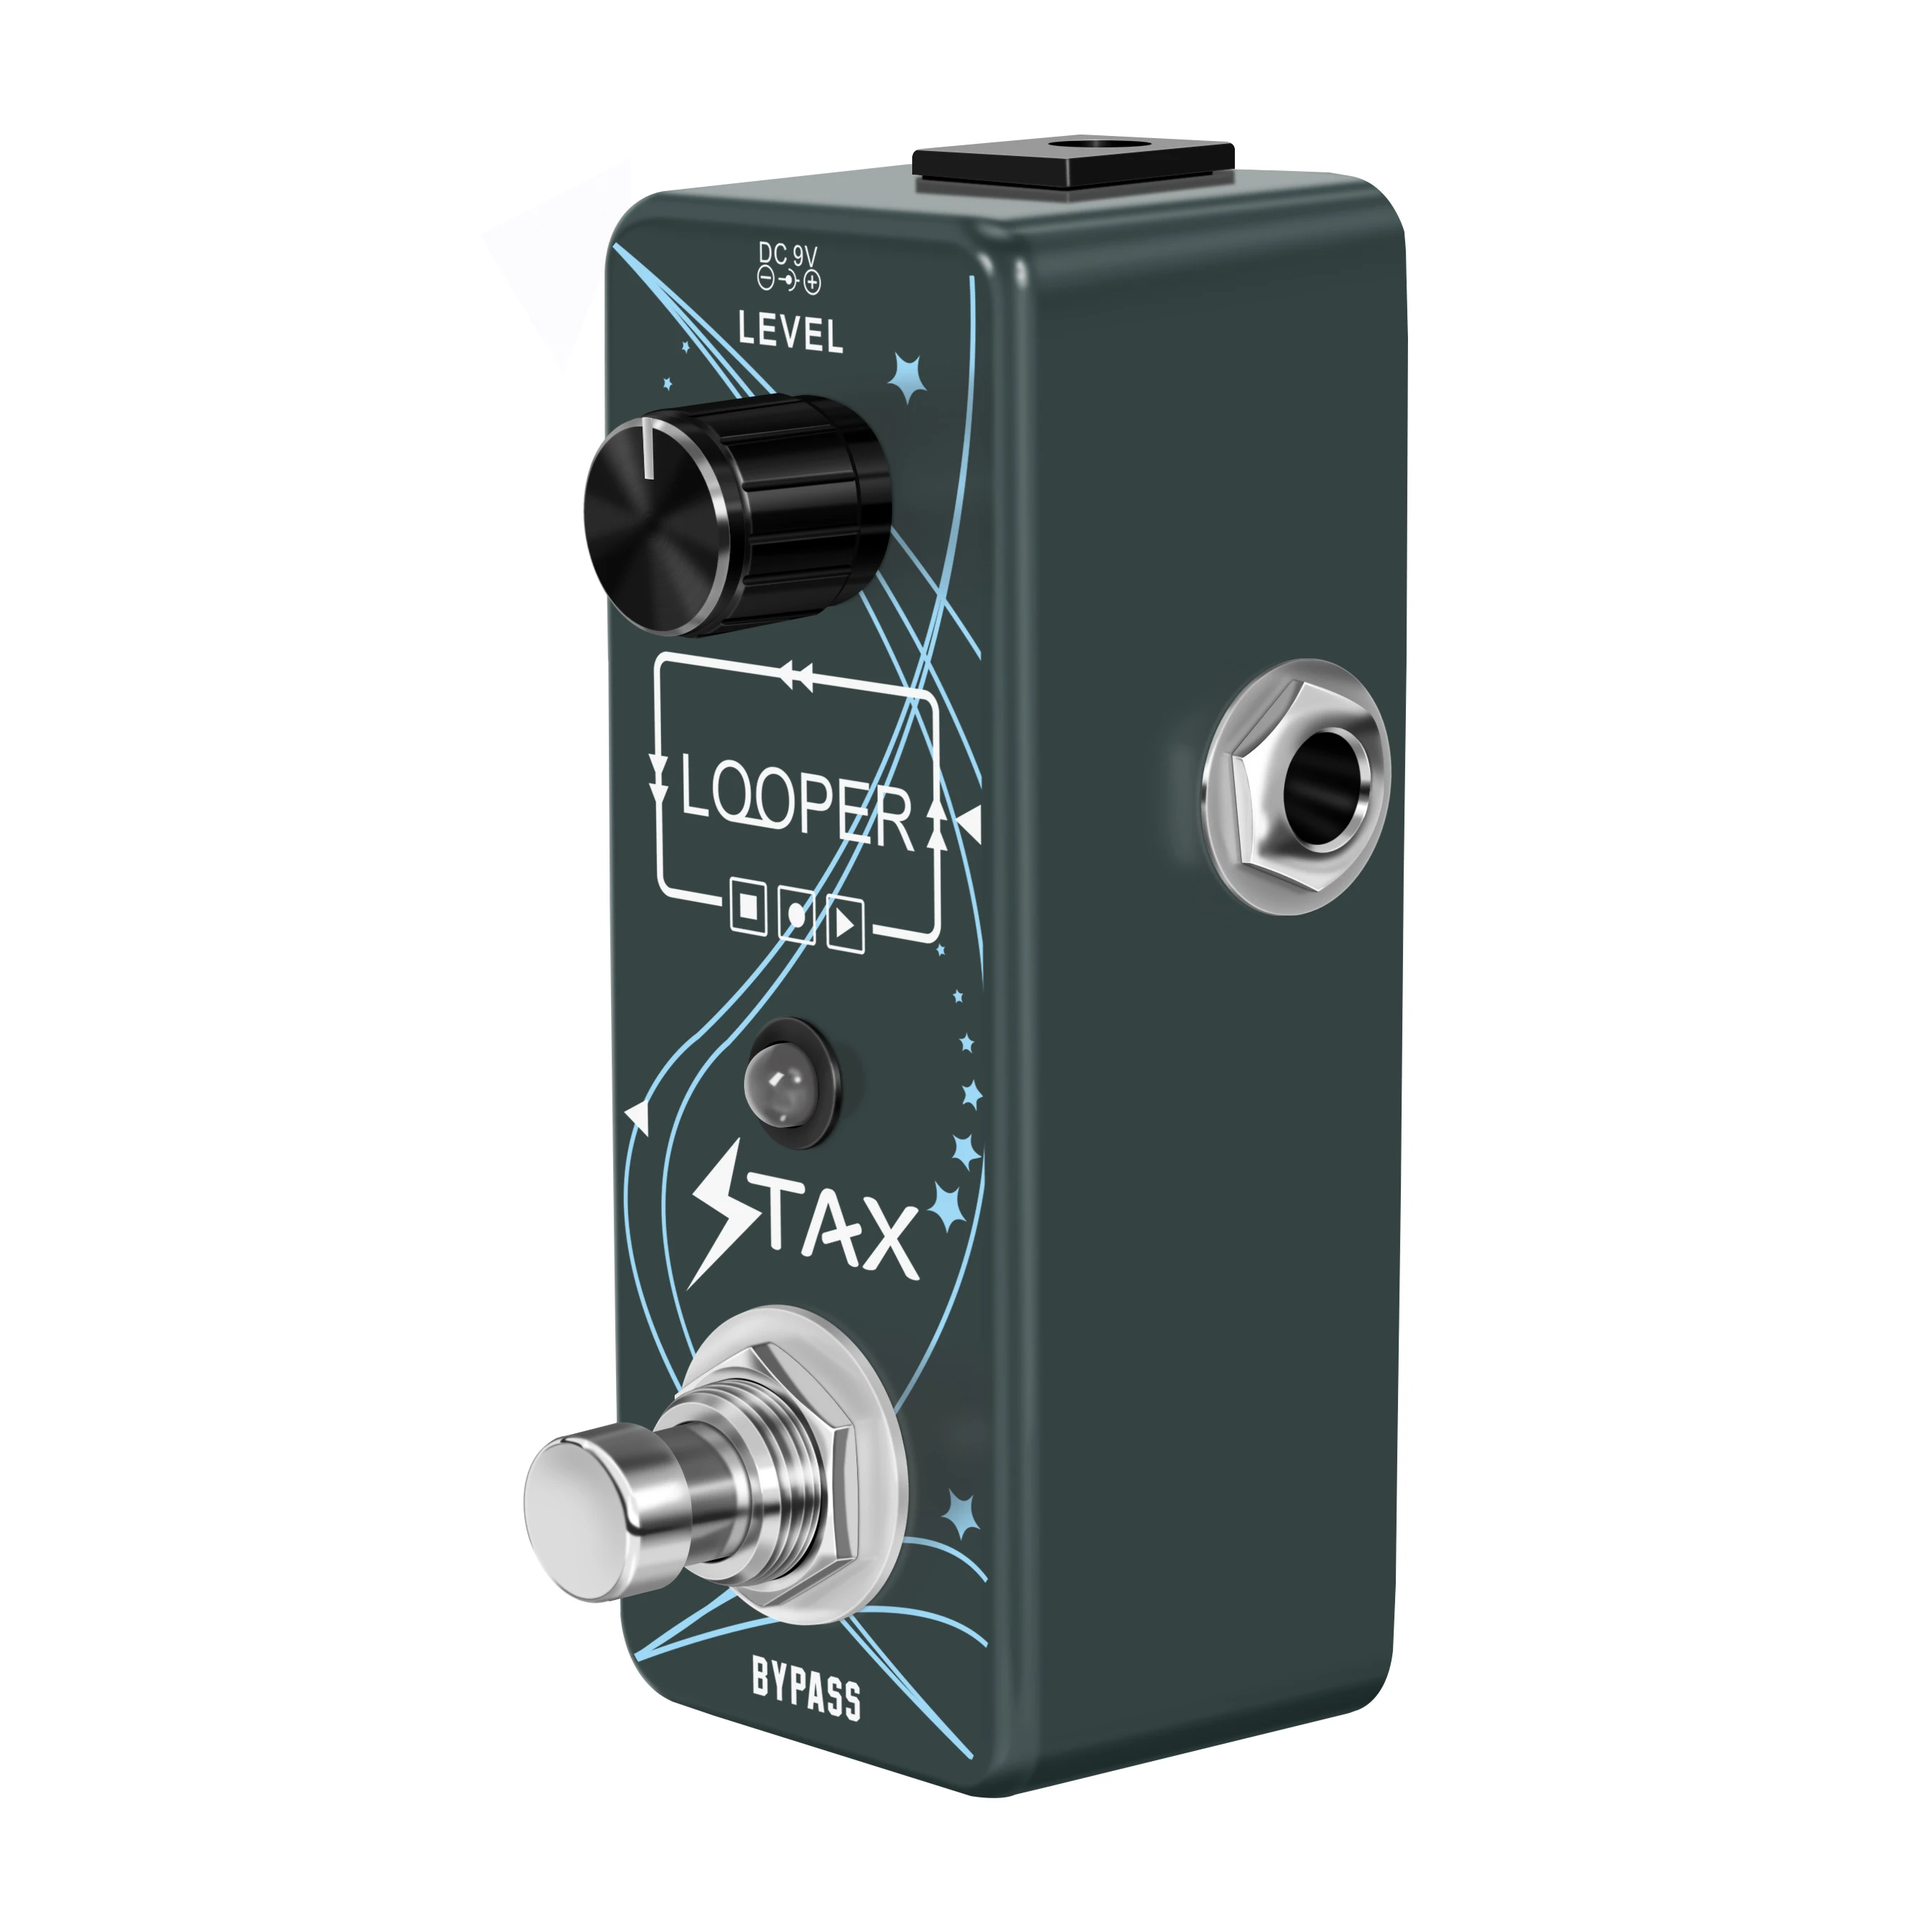 Stax LEF-332 Guitar Looper Pedal Digital Looper Effect Pedals For Electric Guitar Bass 10 Min Recording Time enlarge